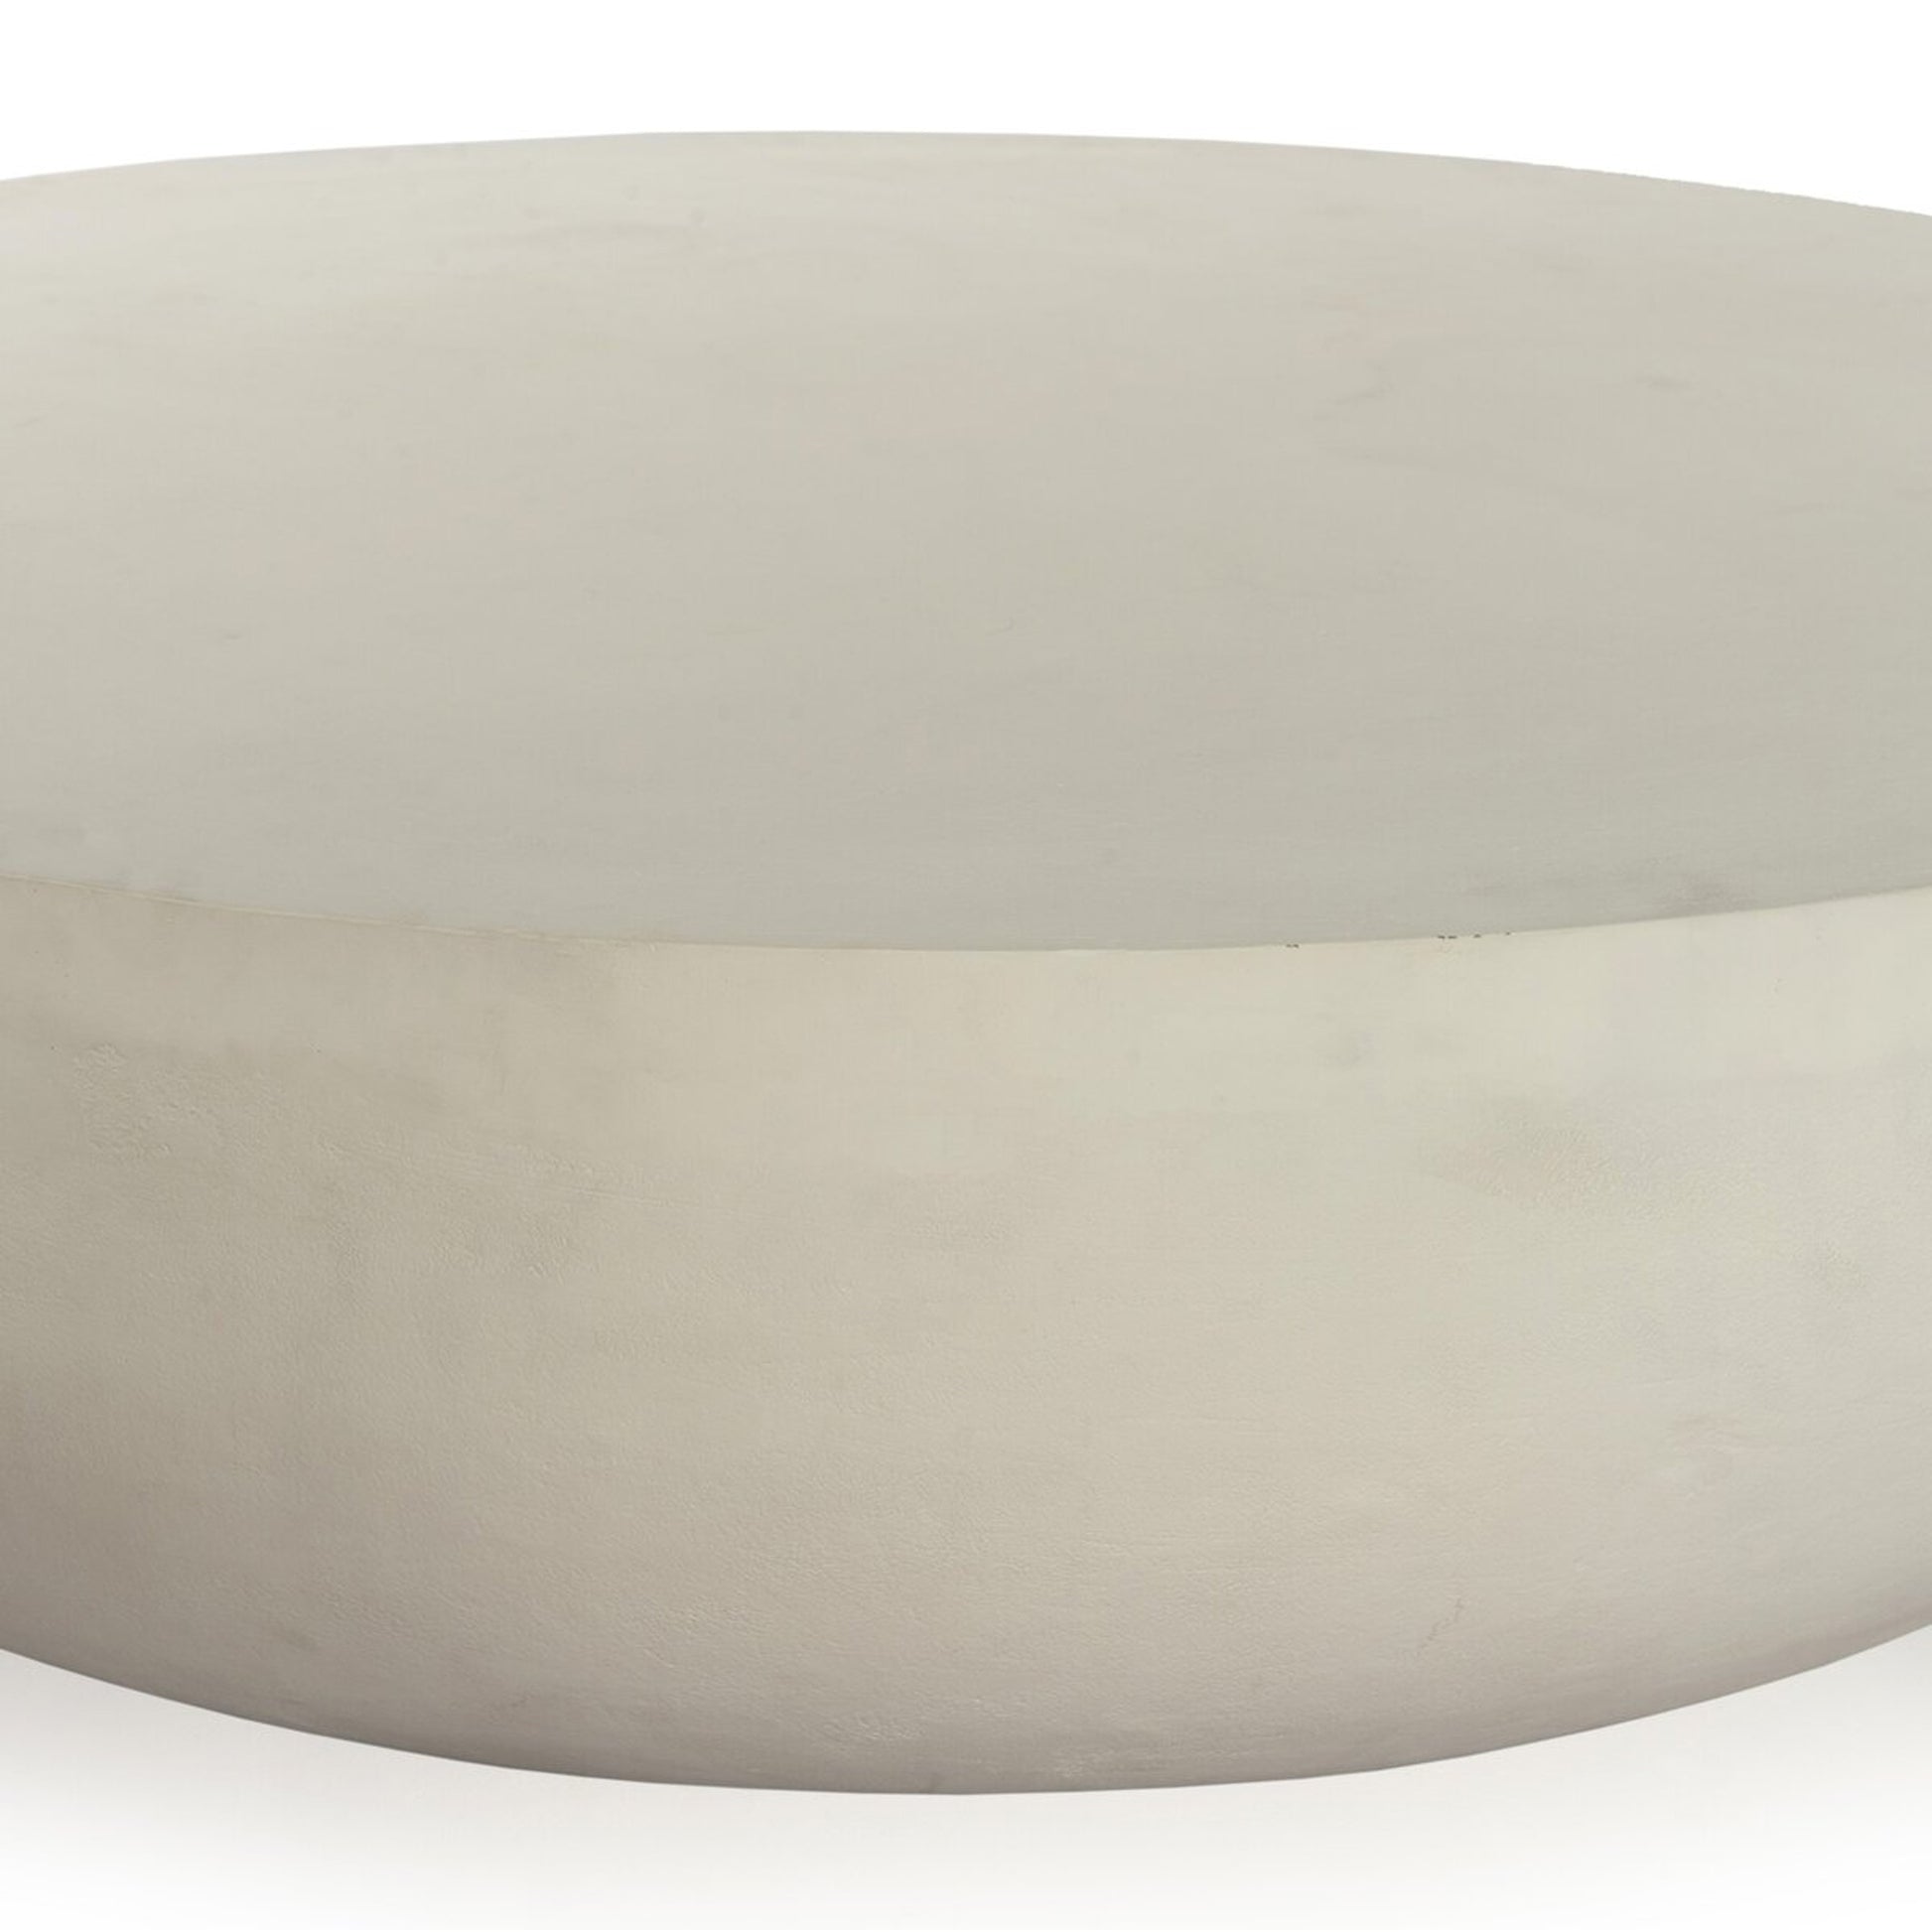 Vox Round Coffee Table – Indoor and Outdoor - IONS DESIGN